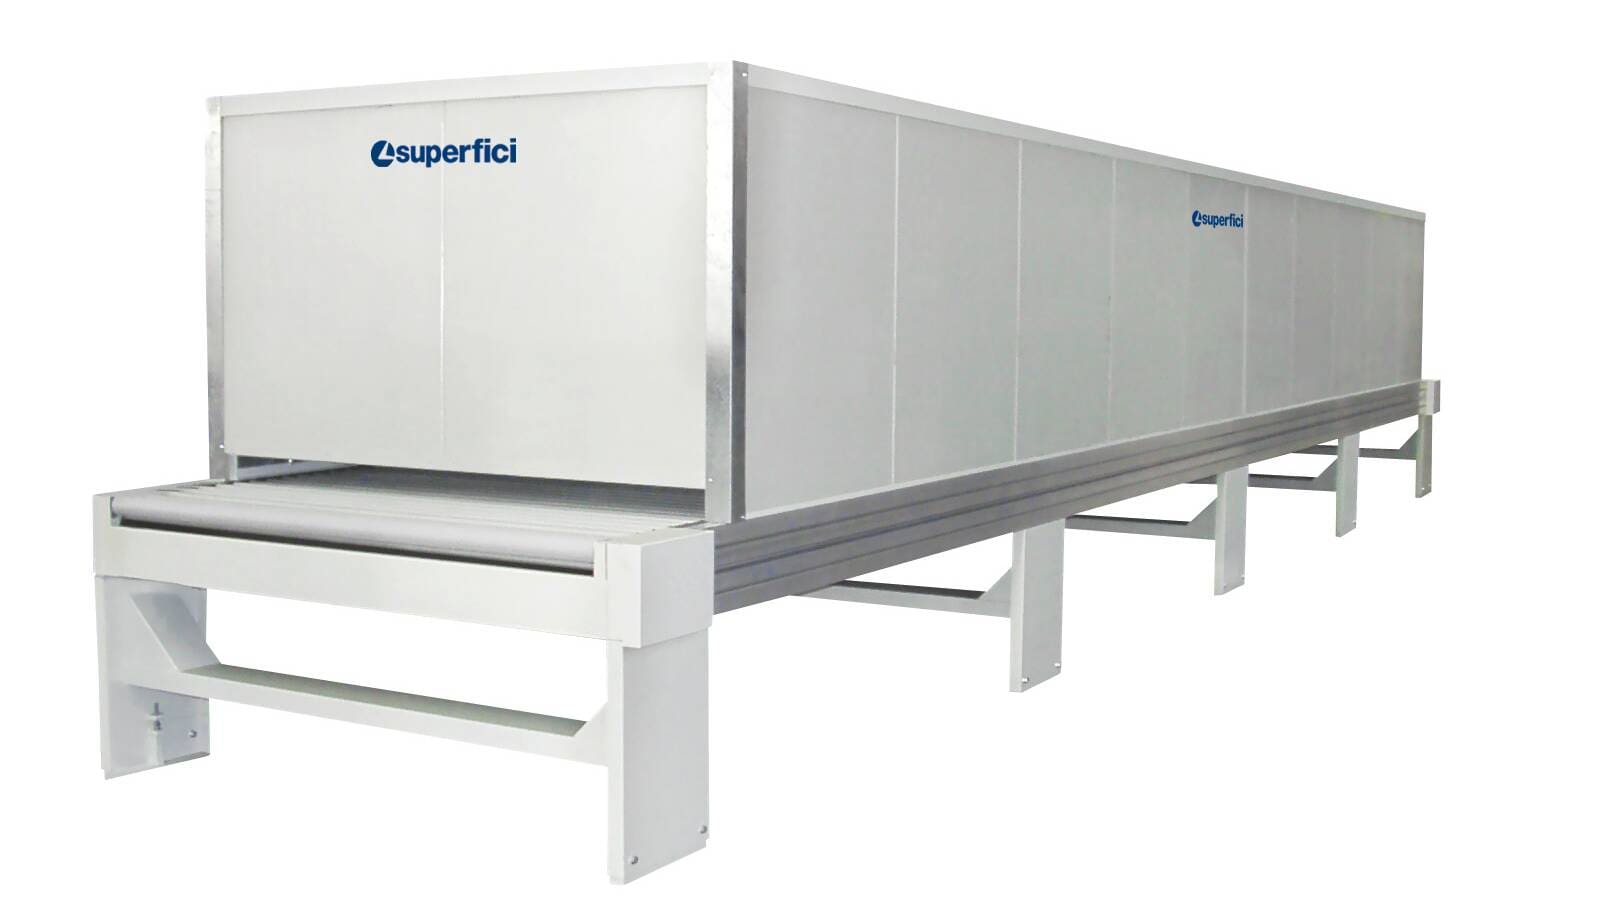 Finishing systems - Flat dryers - air jet dryers